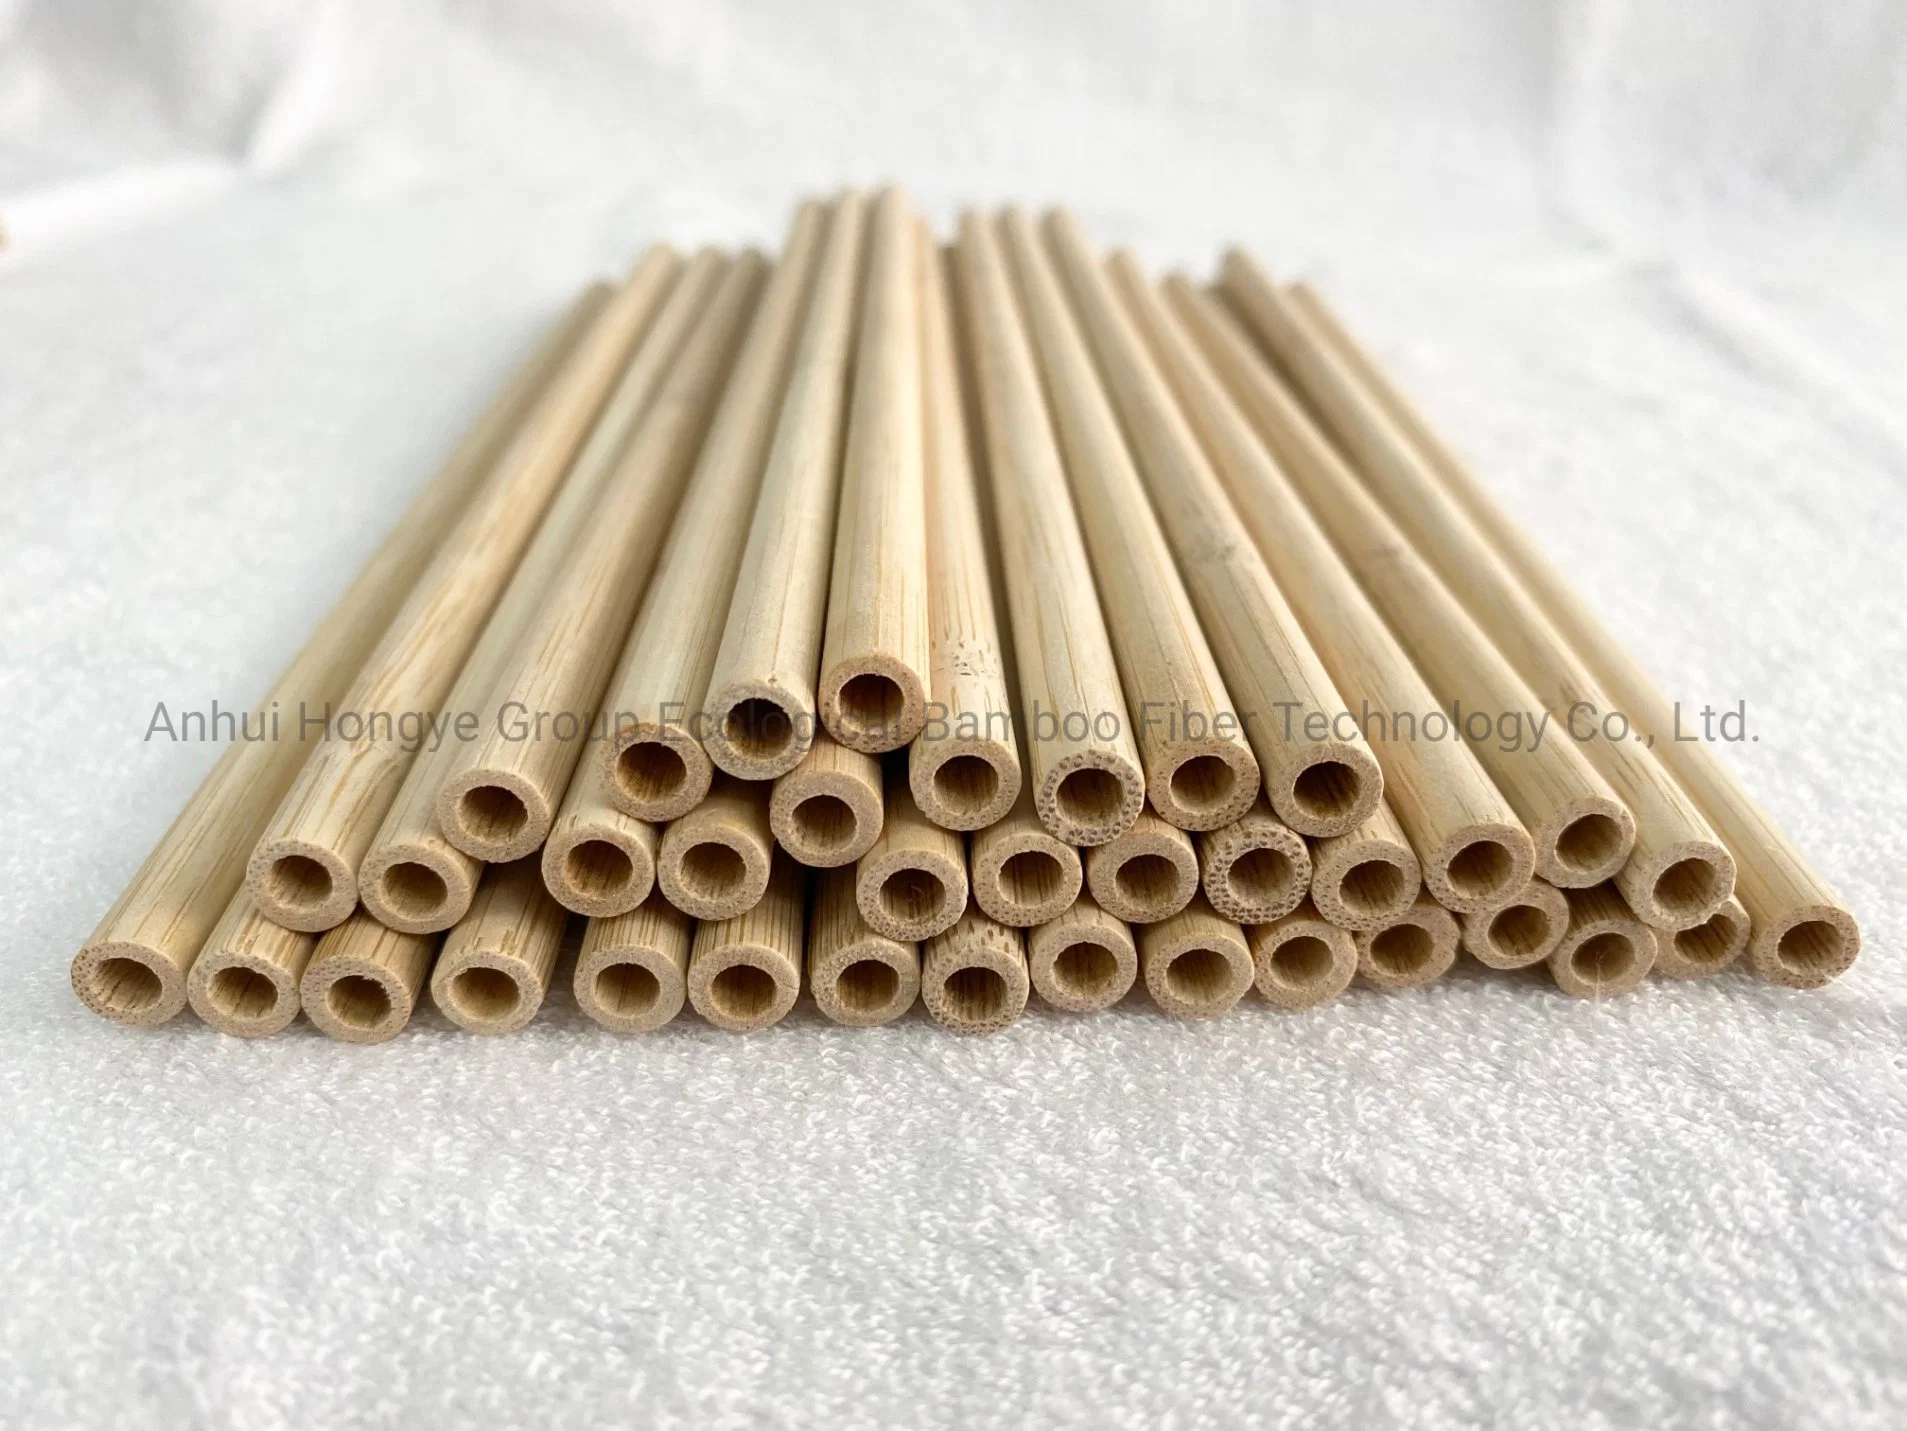 Disposable Carbonization 100% Bamboo Straw Biodegradable Hot Sale Eco-Friendly Product 7.0*200 mm